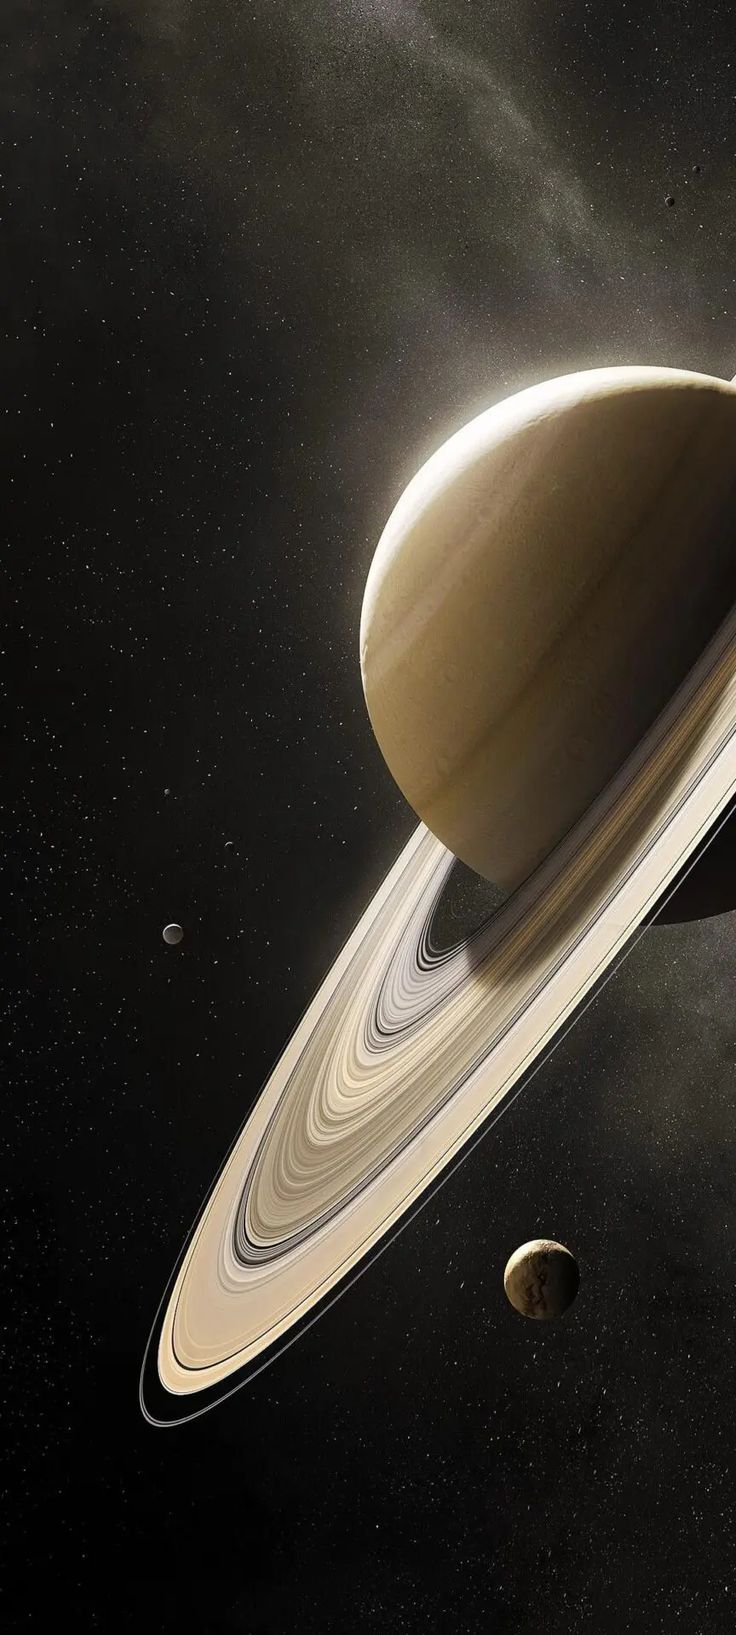 an artist's rendering of saturn and its satellites in the solar system, with two planets